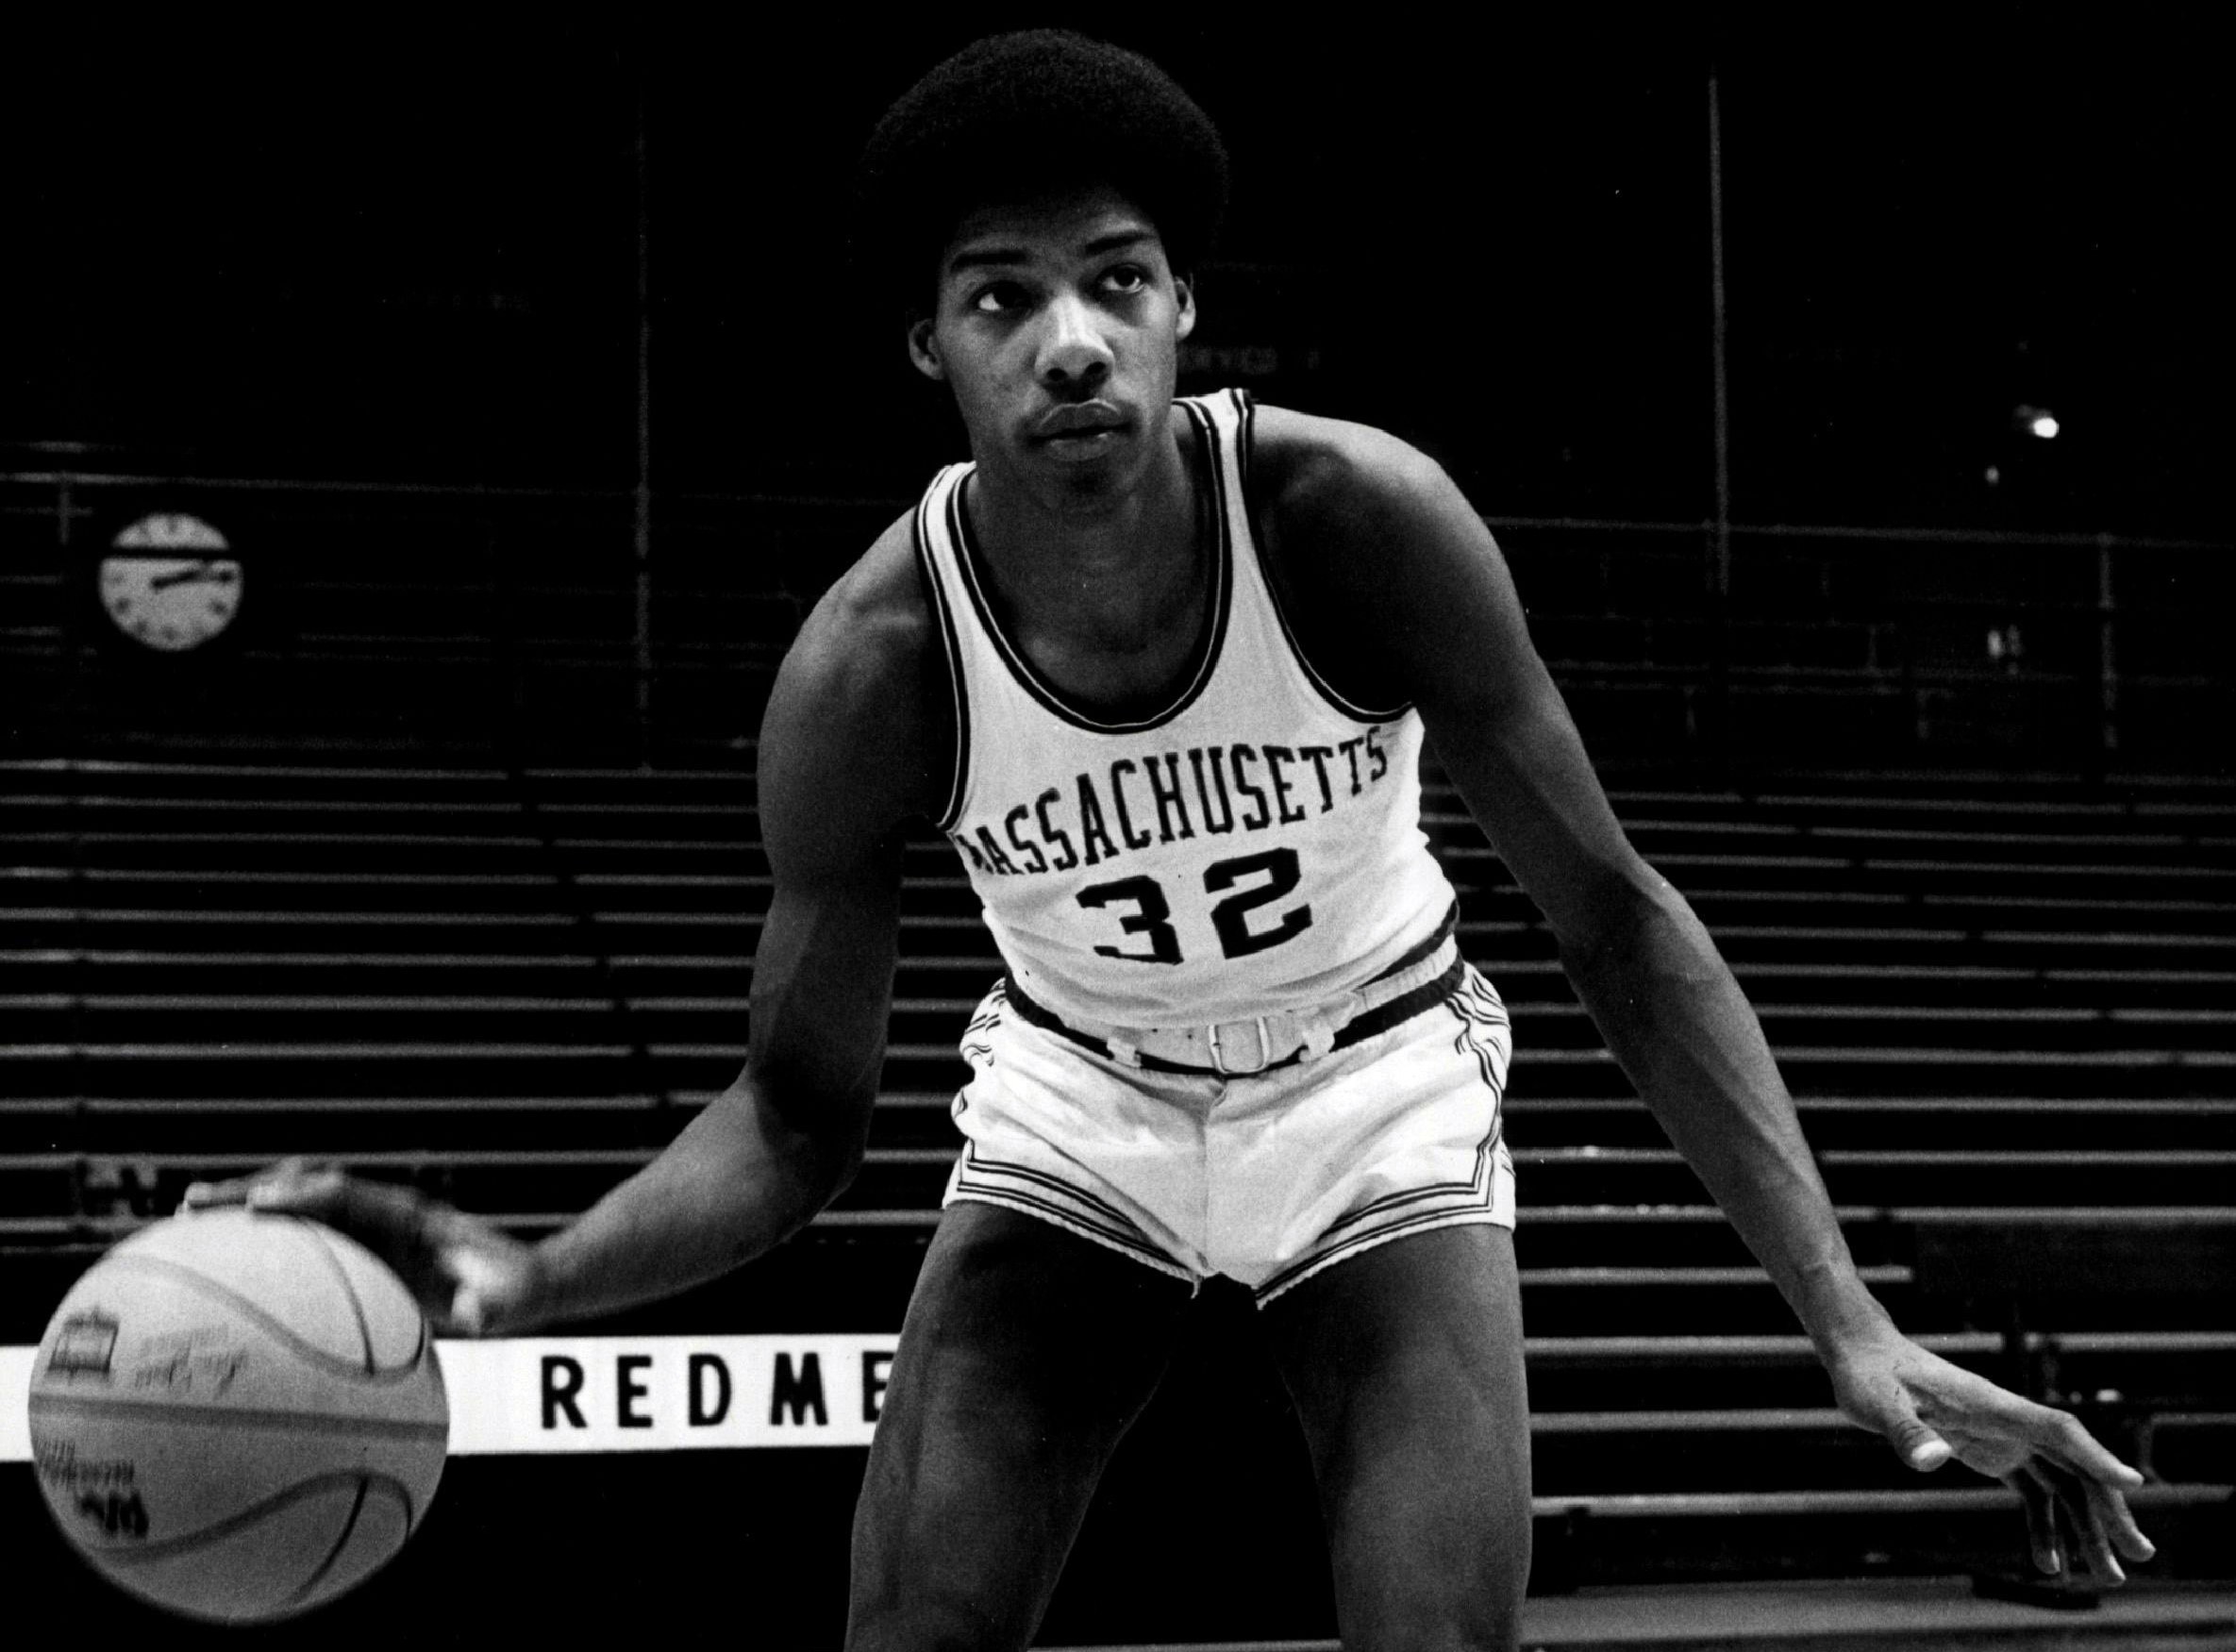 Julius Erving would be proud of campus statue, says UMass is